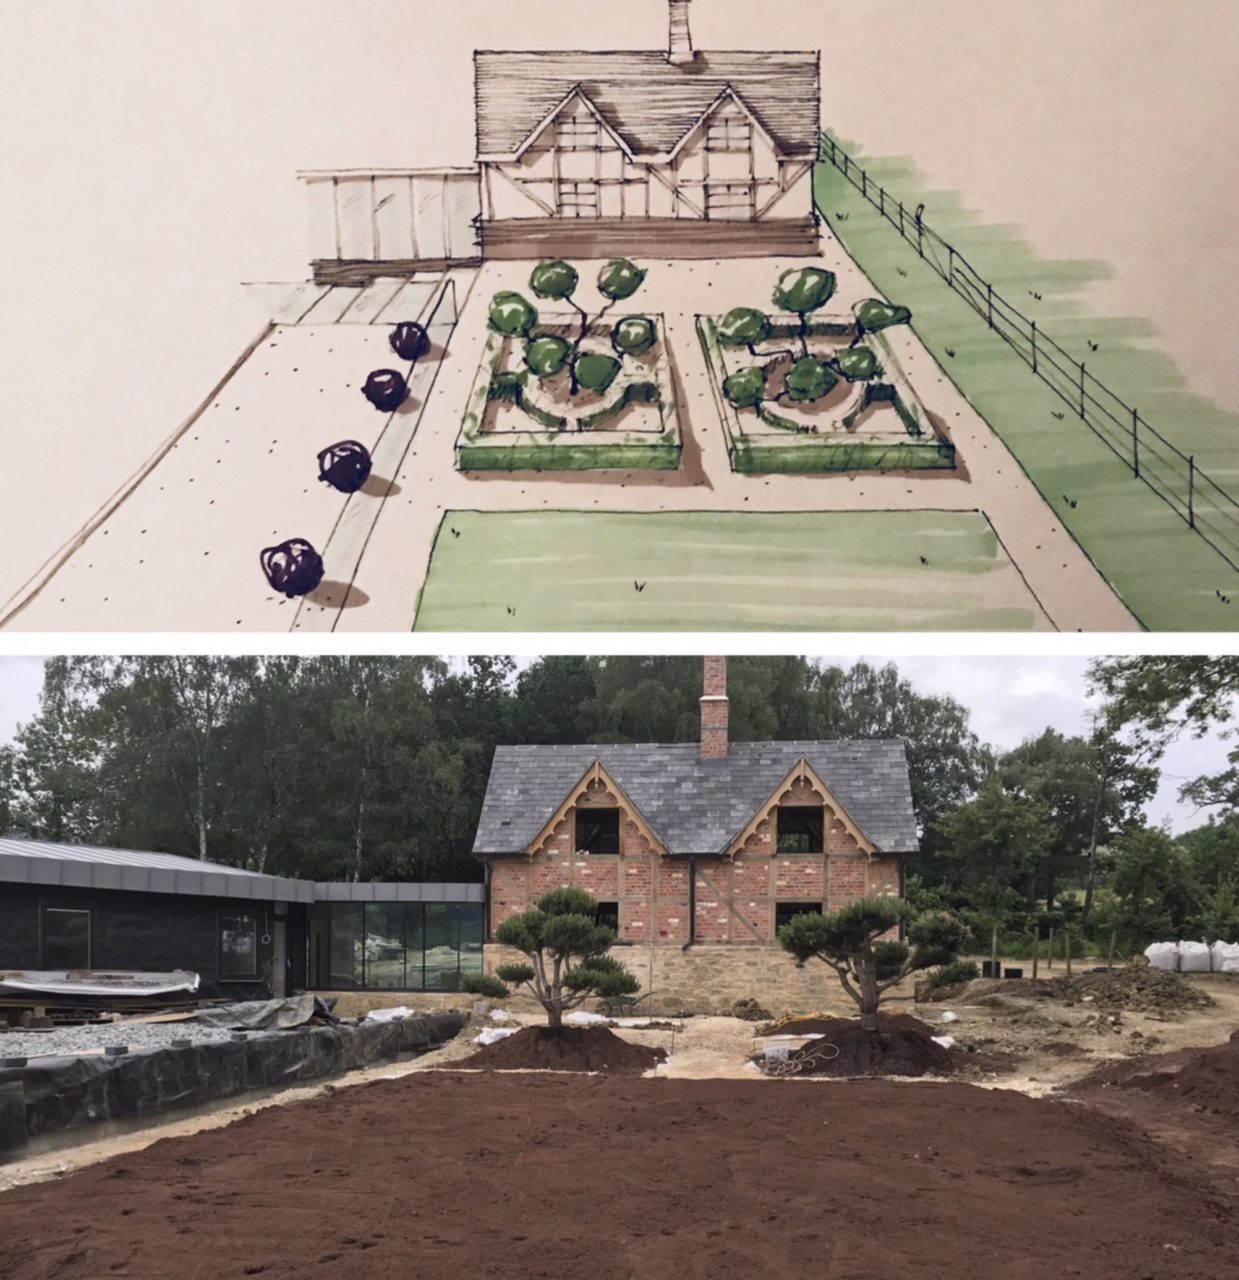 A sketch of my proposal & the real garden underway